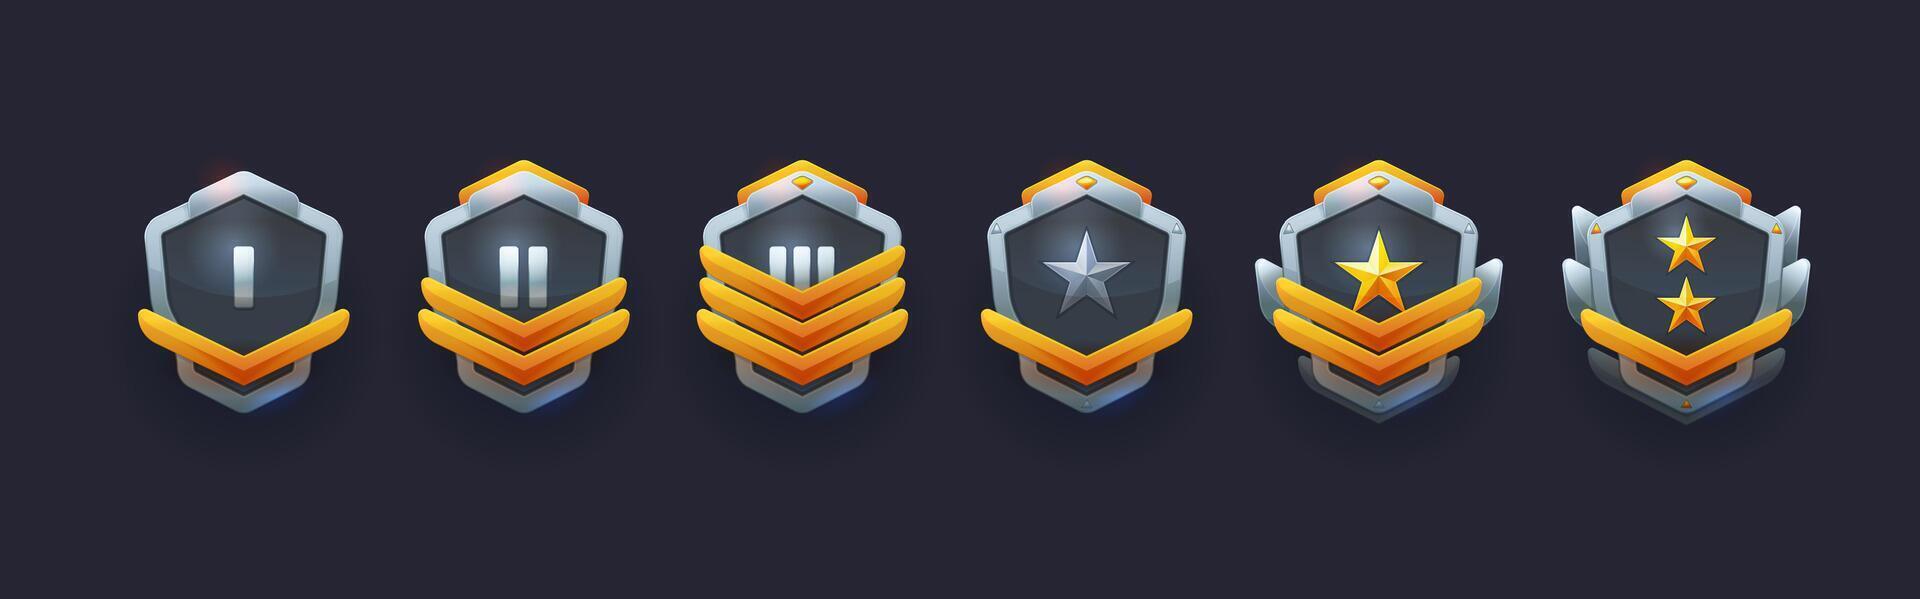 Military game achievement badges or rank awards vector